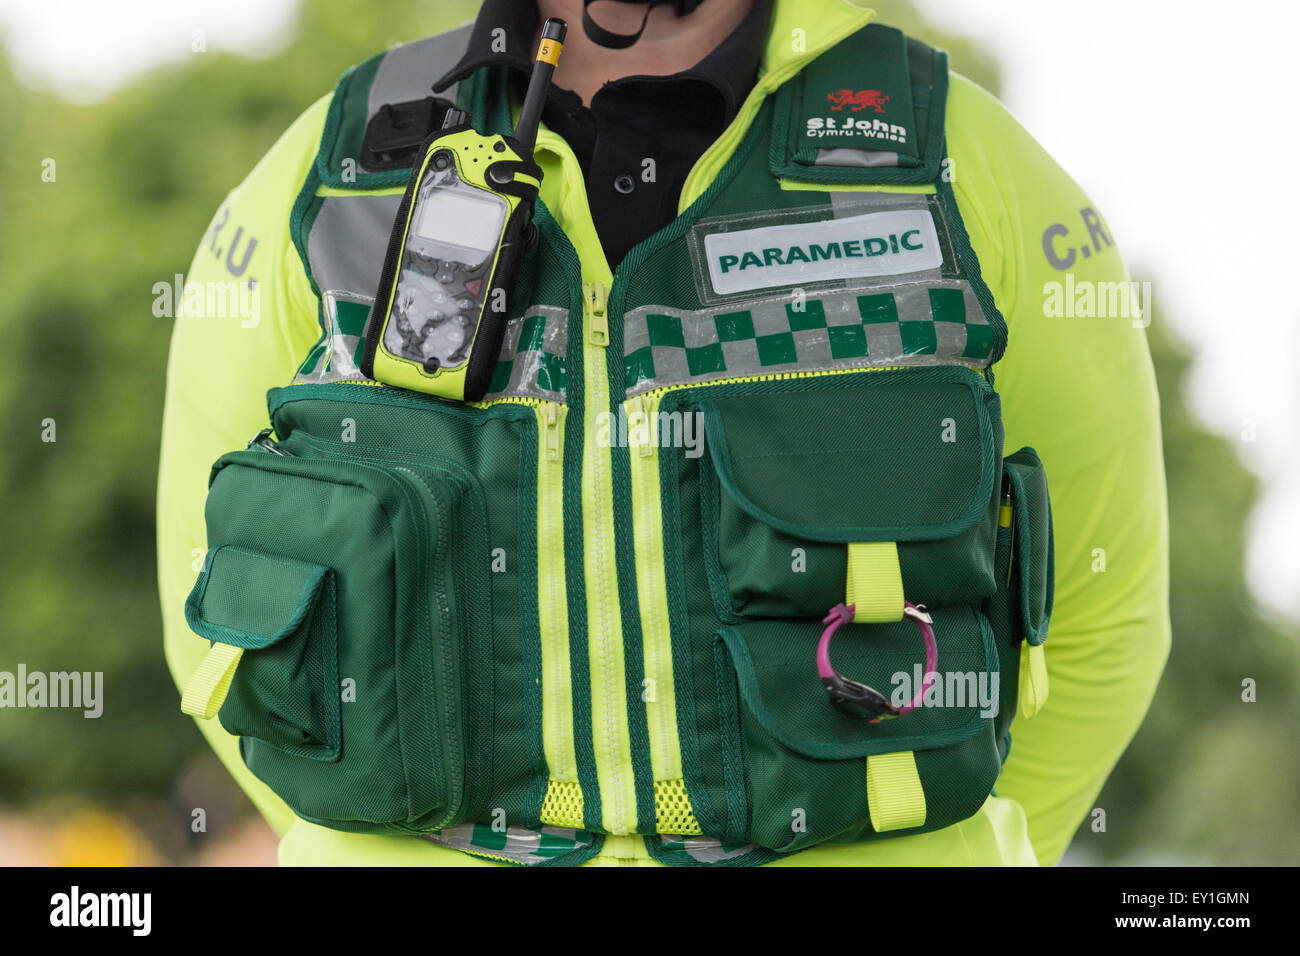 A closeup of a Welsh paramedic / ambulance worker. The Welsh ambulance service are under pressure to improve response times. Stock Photo